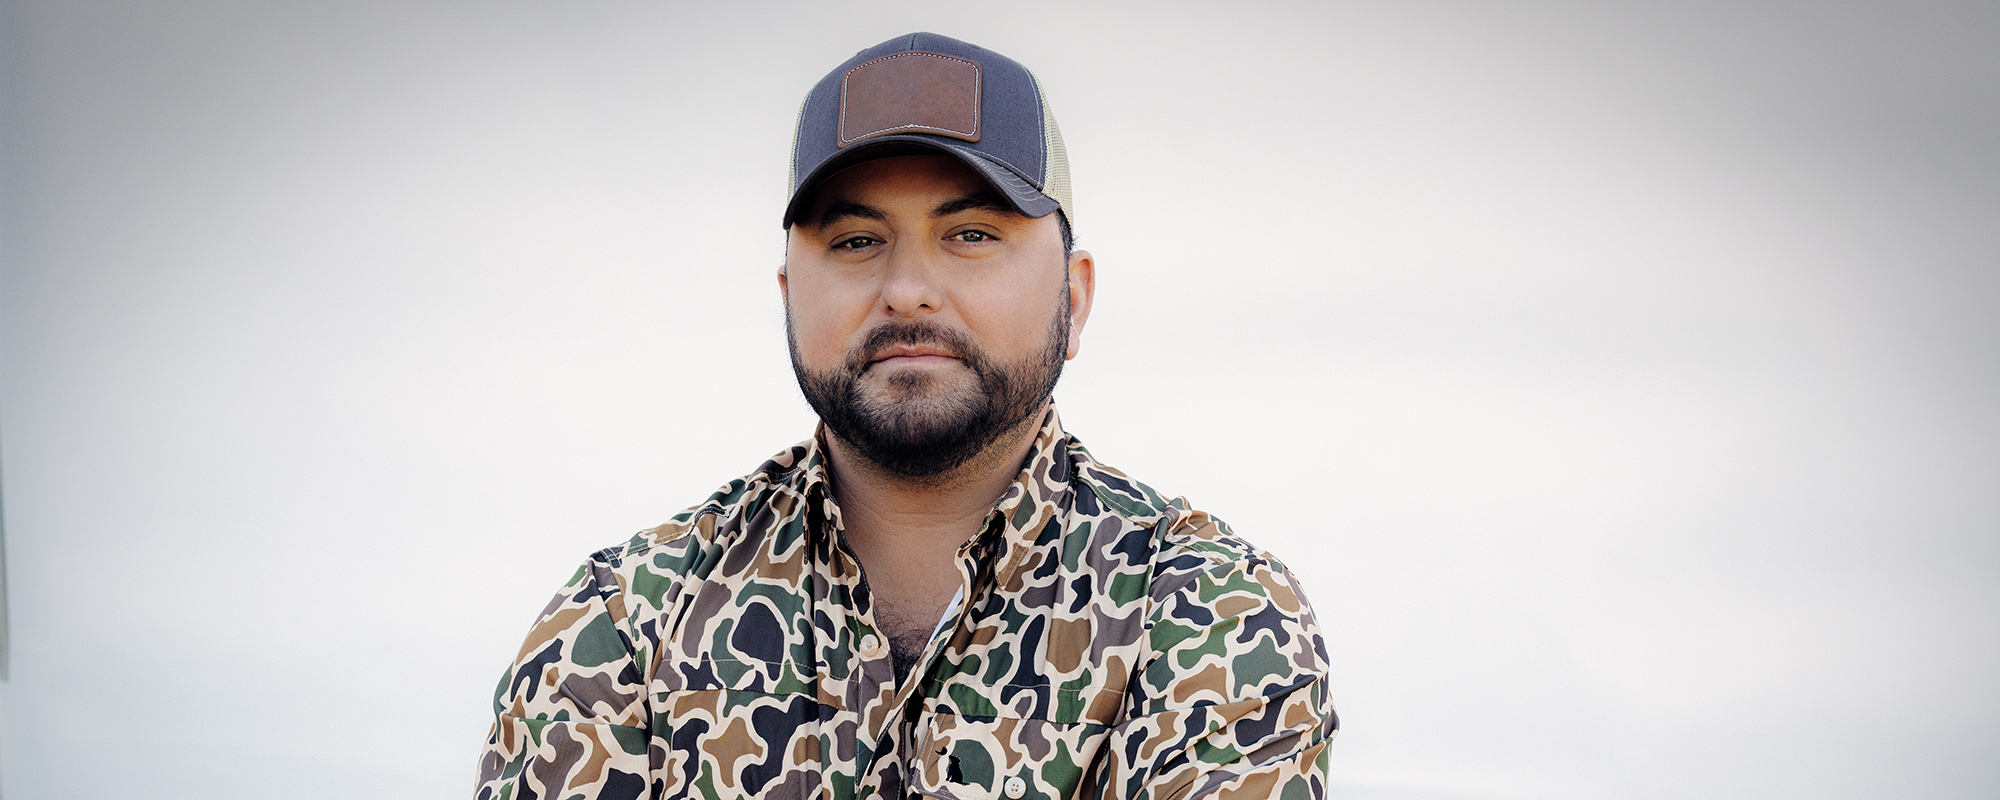 Tyler Farr on His New EP, ‘Rednecks Like Me’: “I’m Proud As Hell About It”